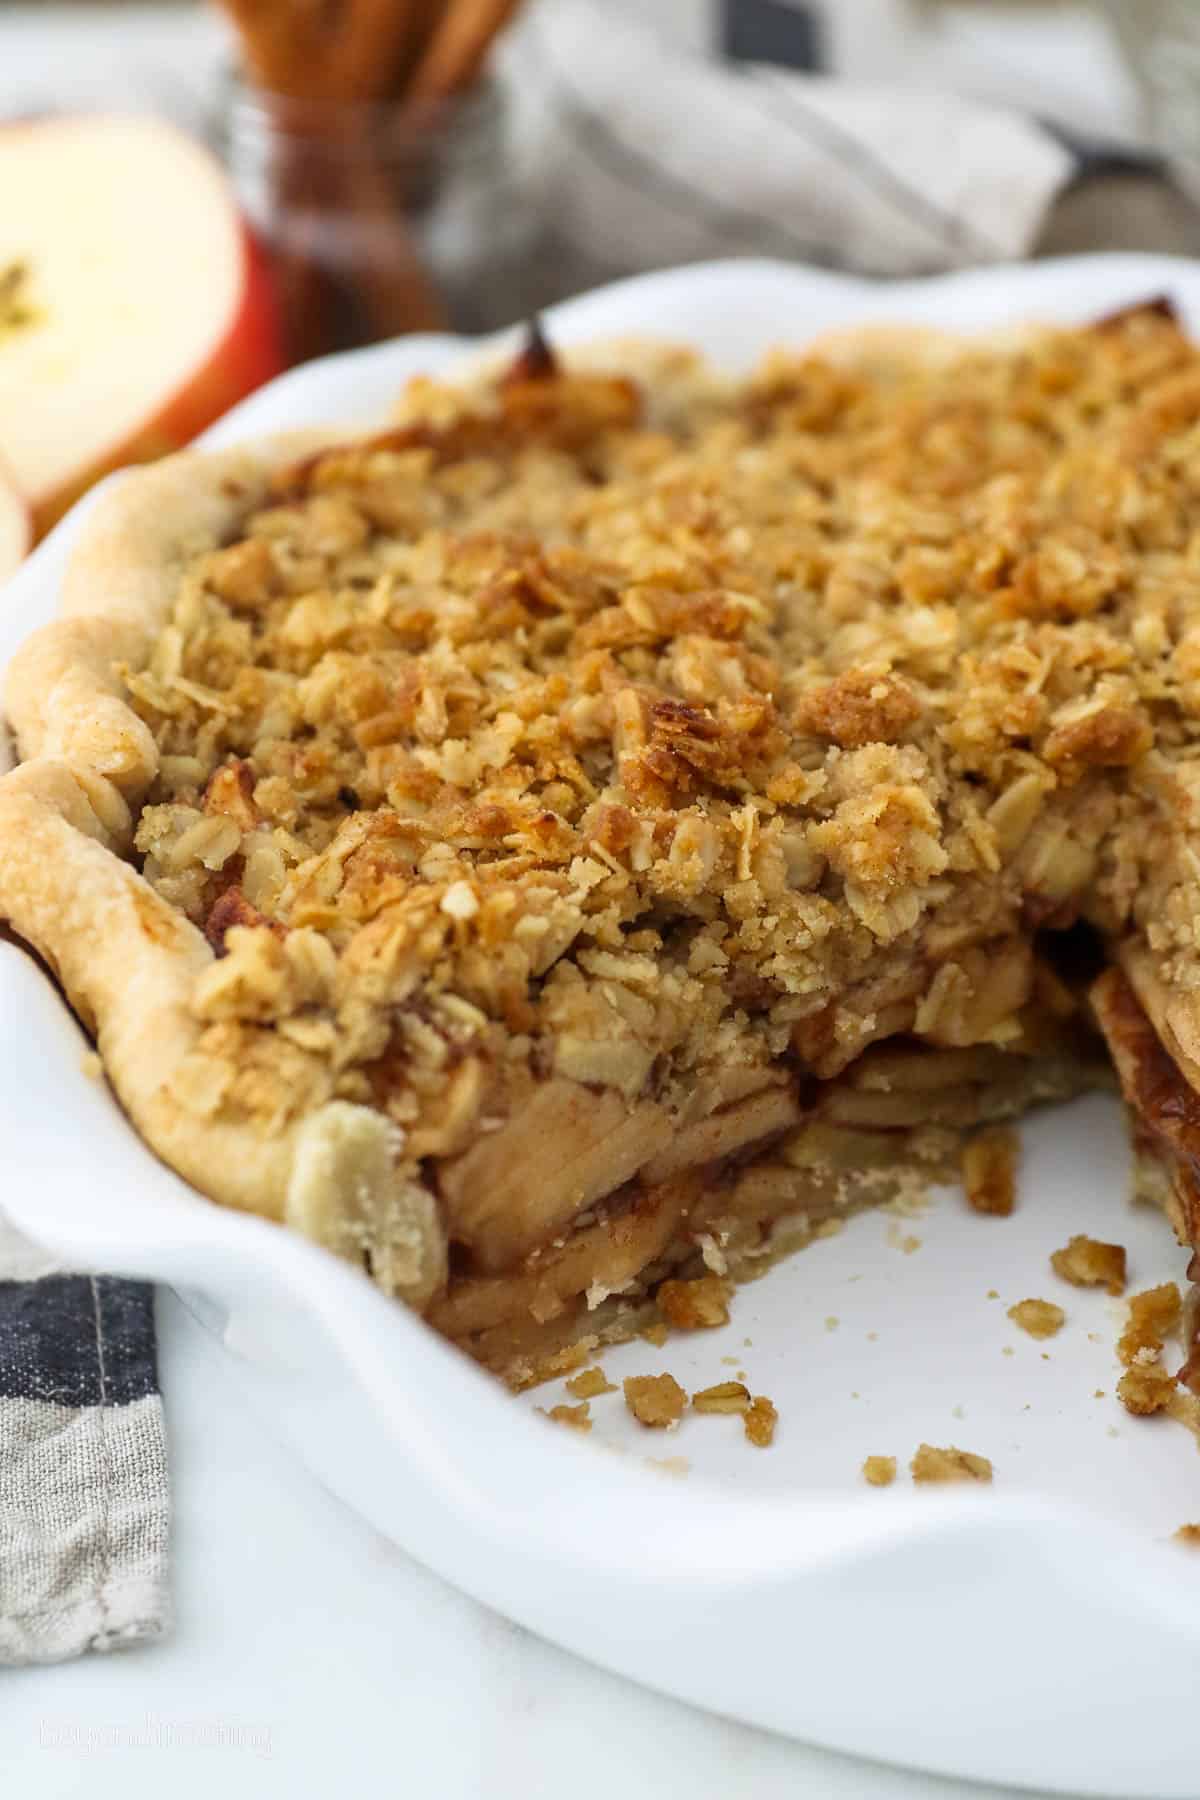 Apple crumble pie in a pie plate with a slice missing, showing layers of apples inside.